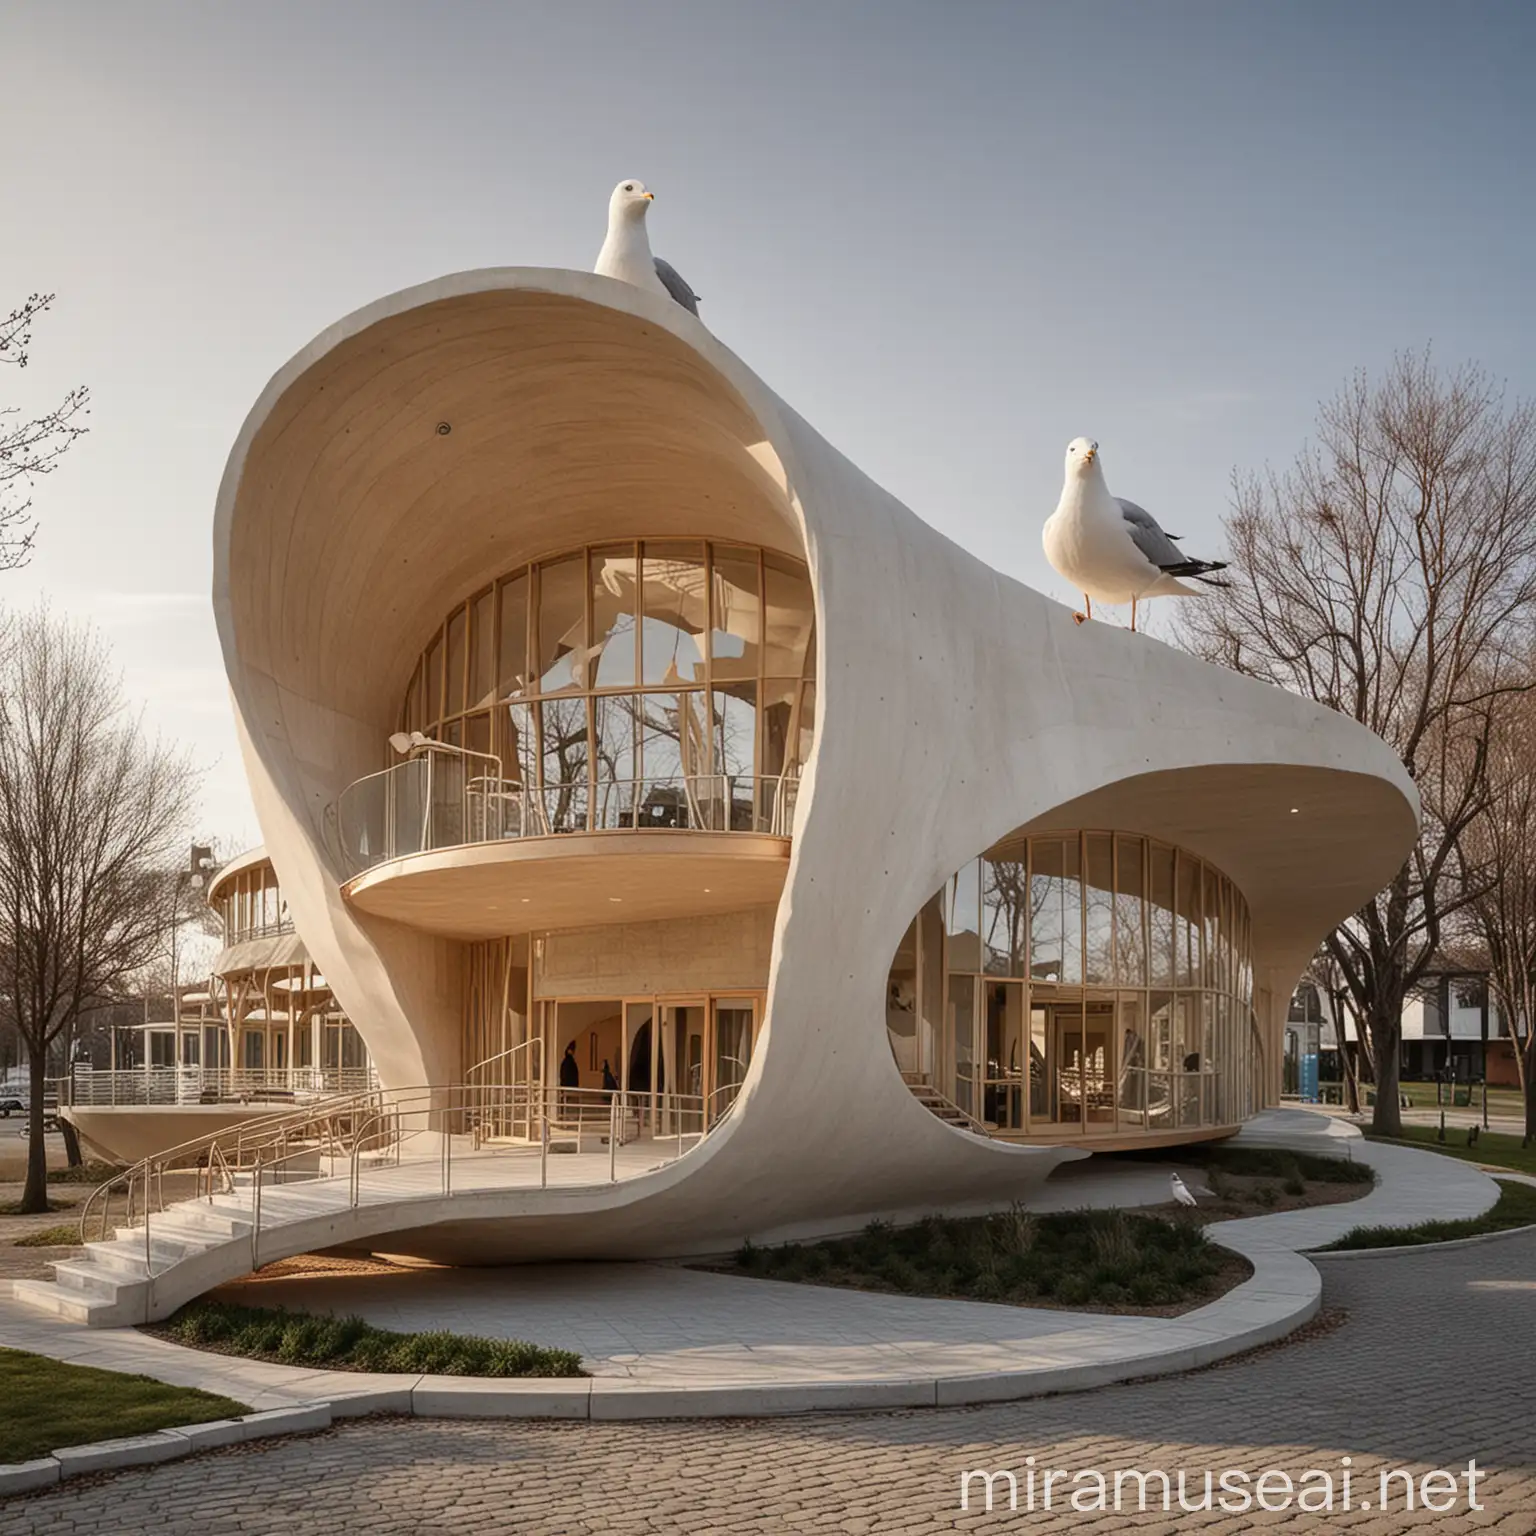 Montessori School Inspired by Seagull Bird Curved Architectural Exterior Design